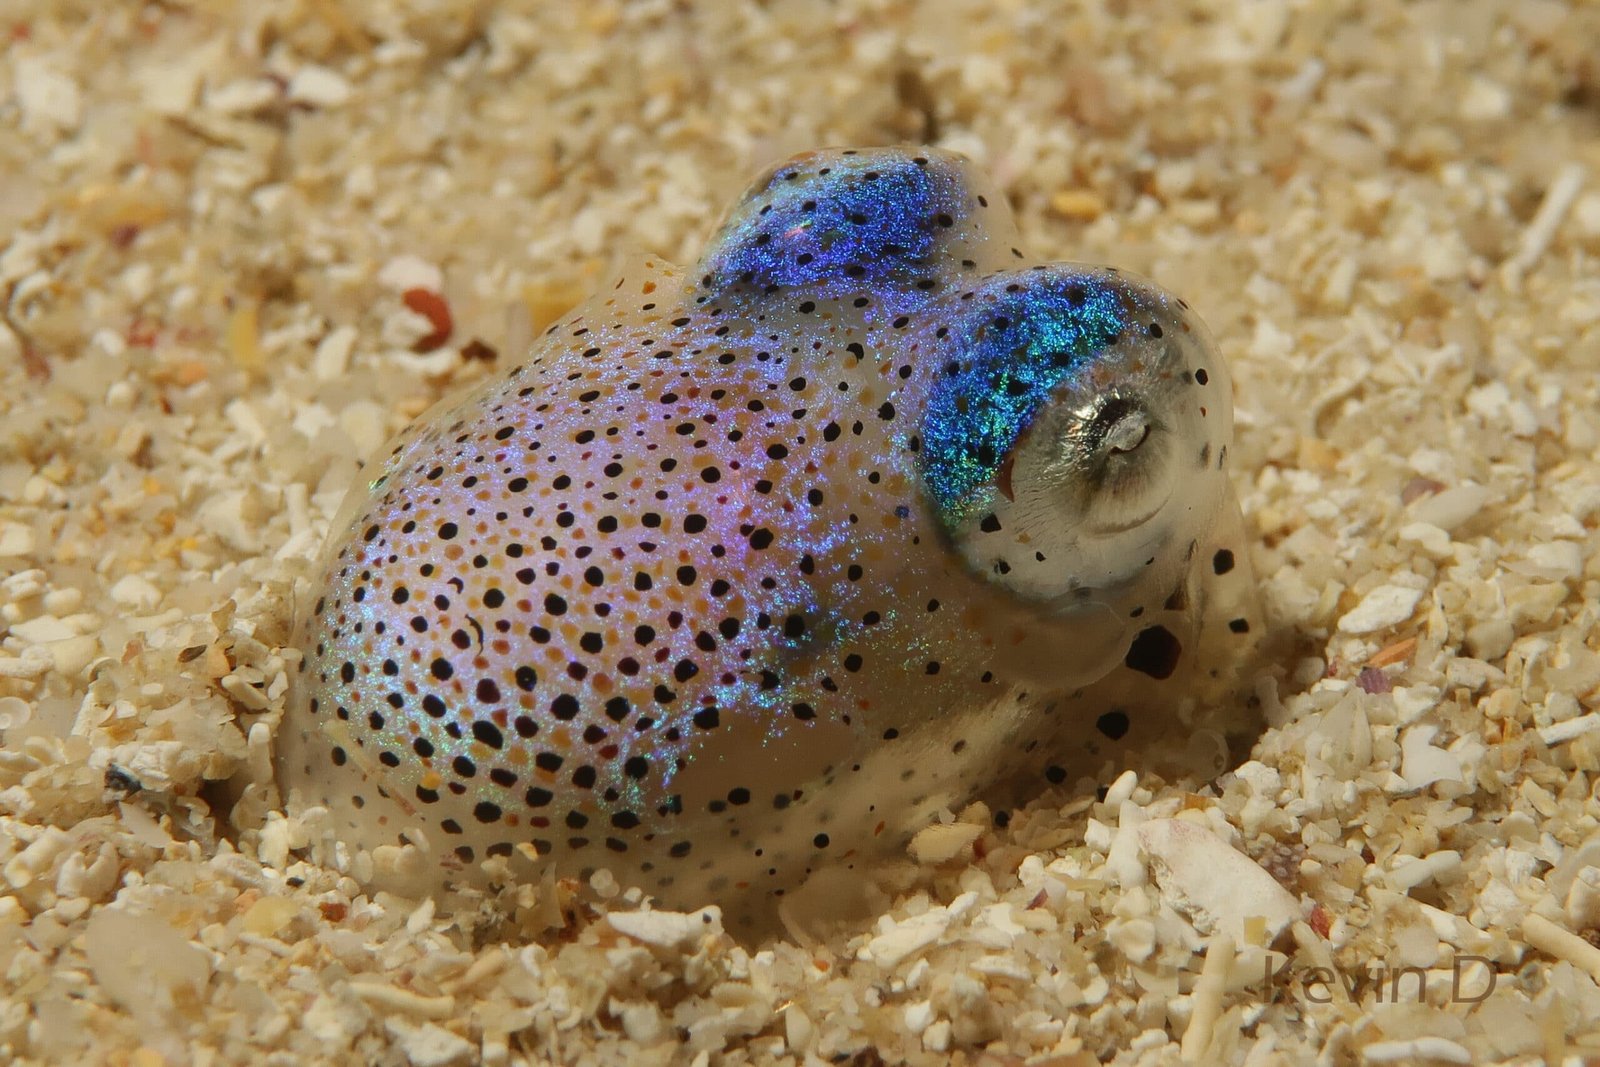 Bobtail squid in the sand